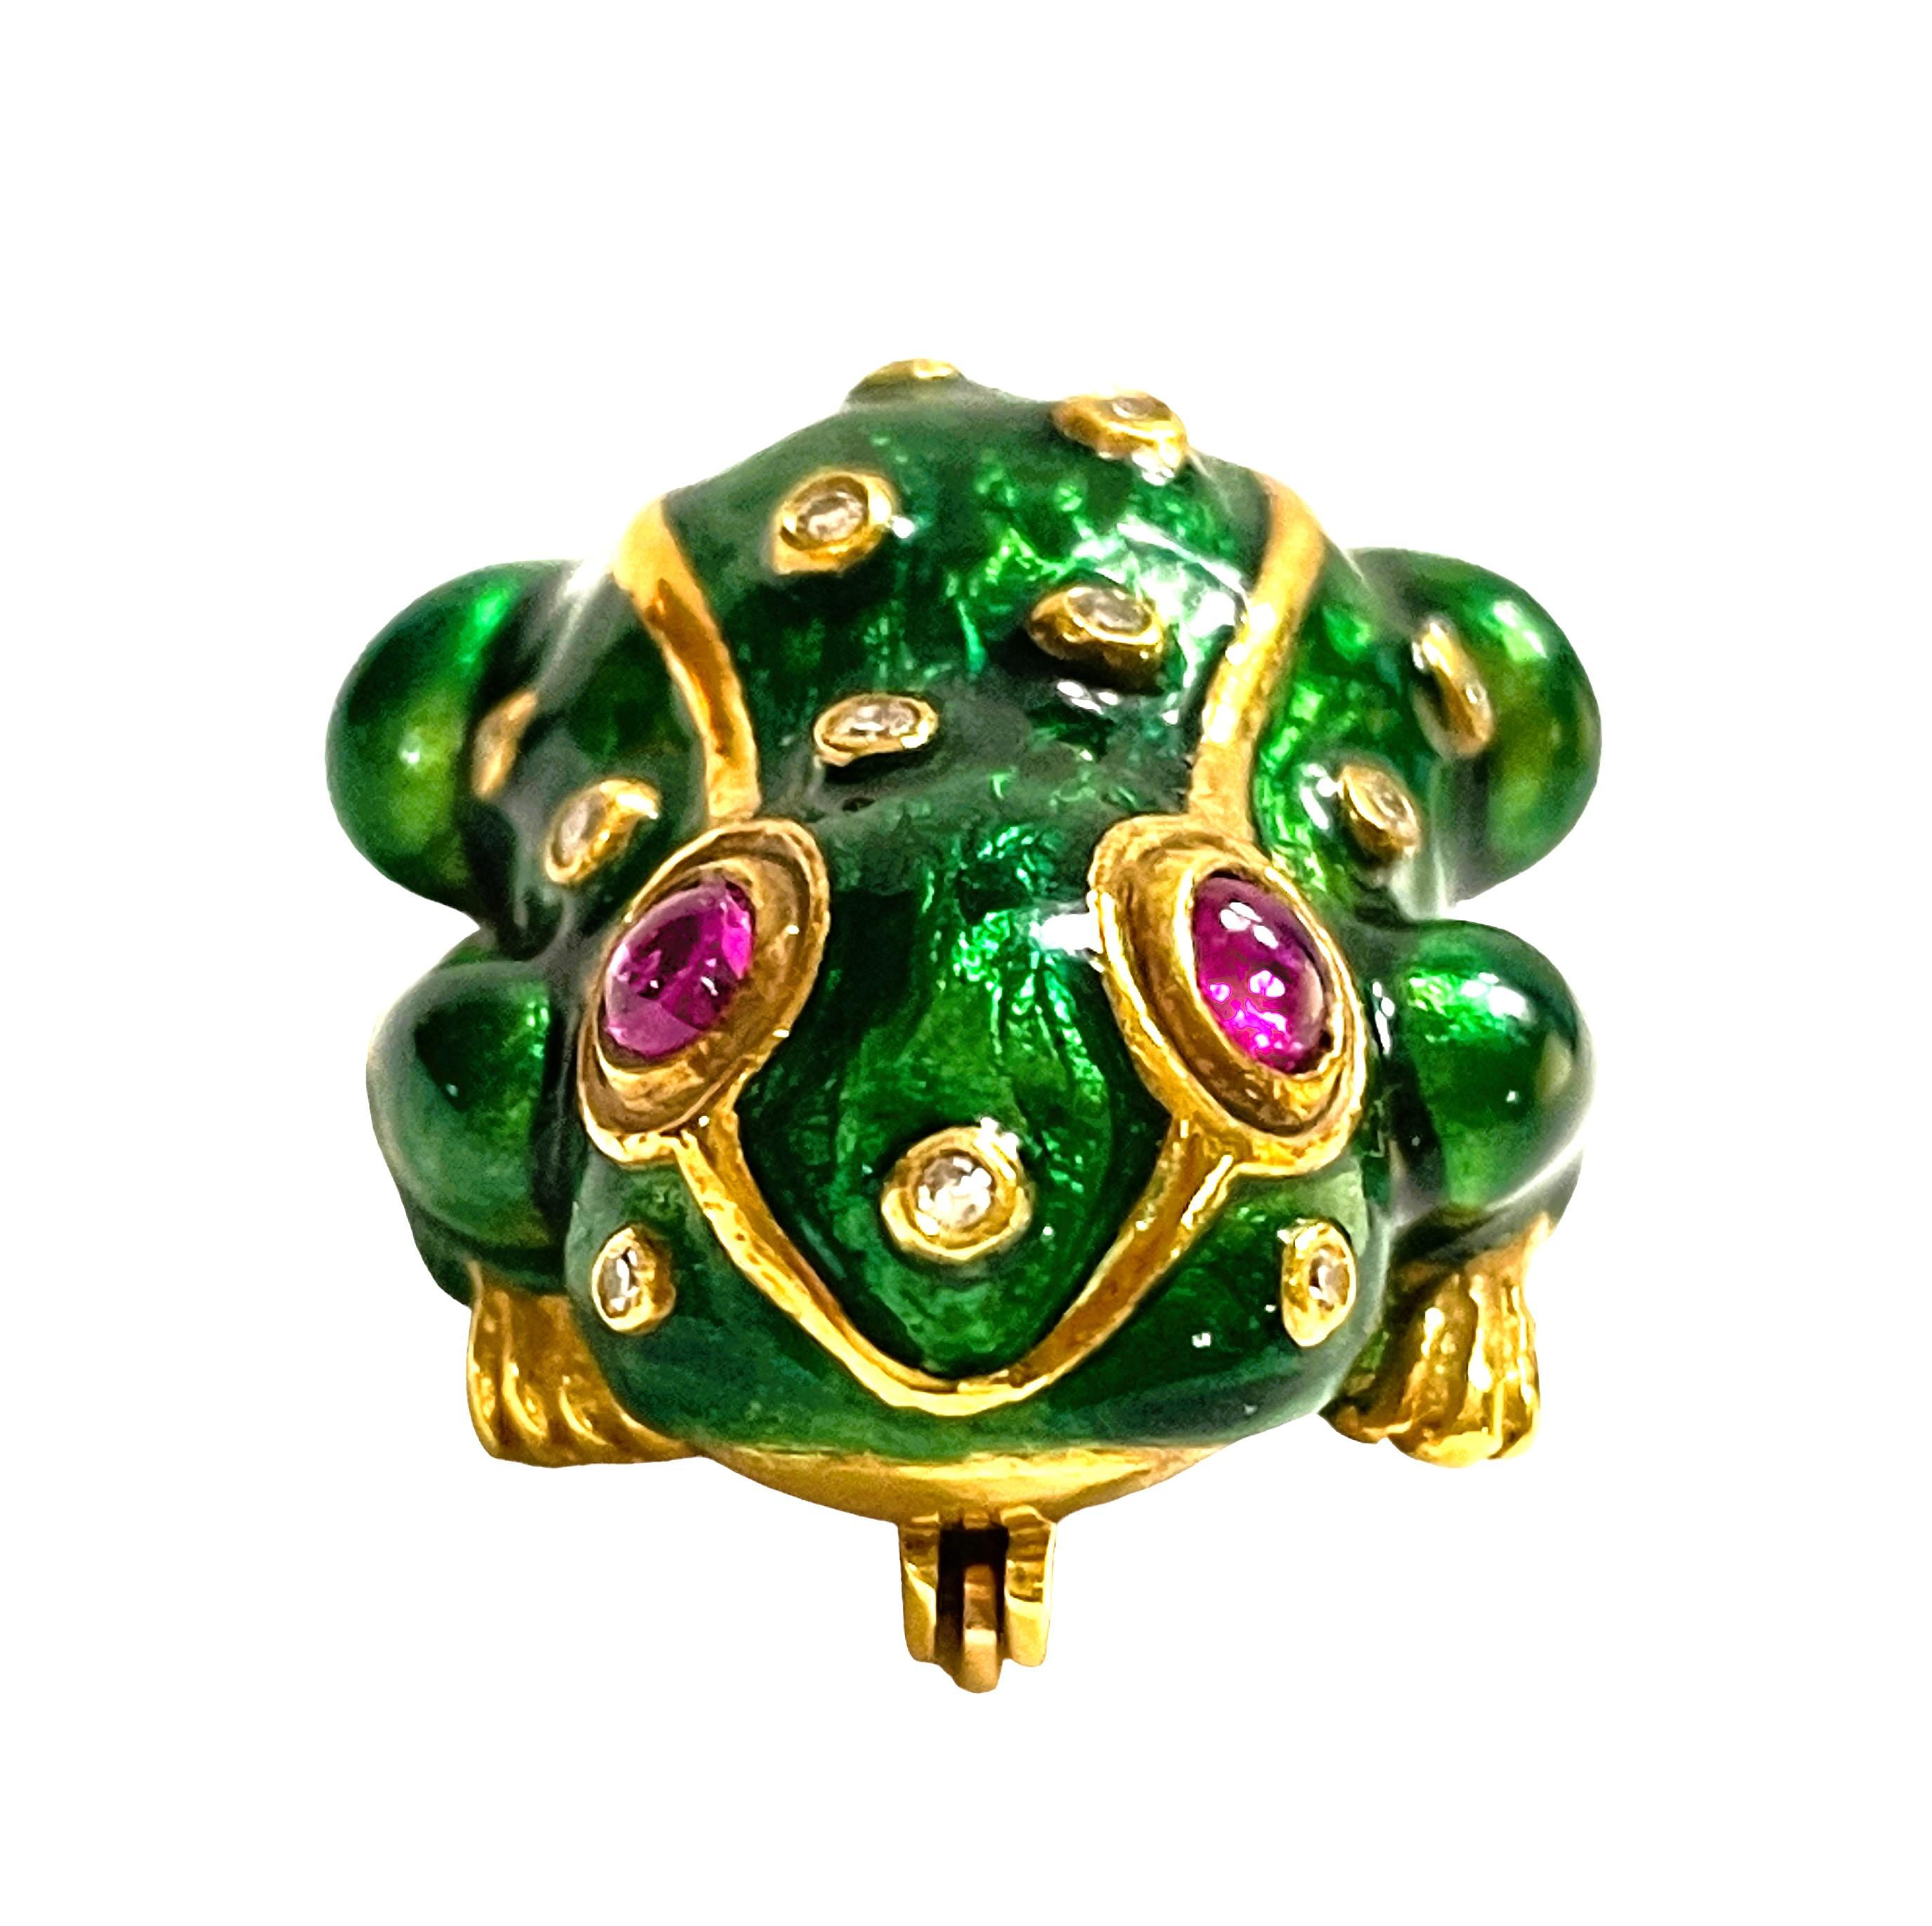 Round Cut Handmade 21k Yellow Gold Enamel Frog Pin/Pedant with Ruby Eyes and Diamond Bumps